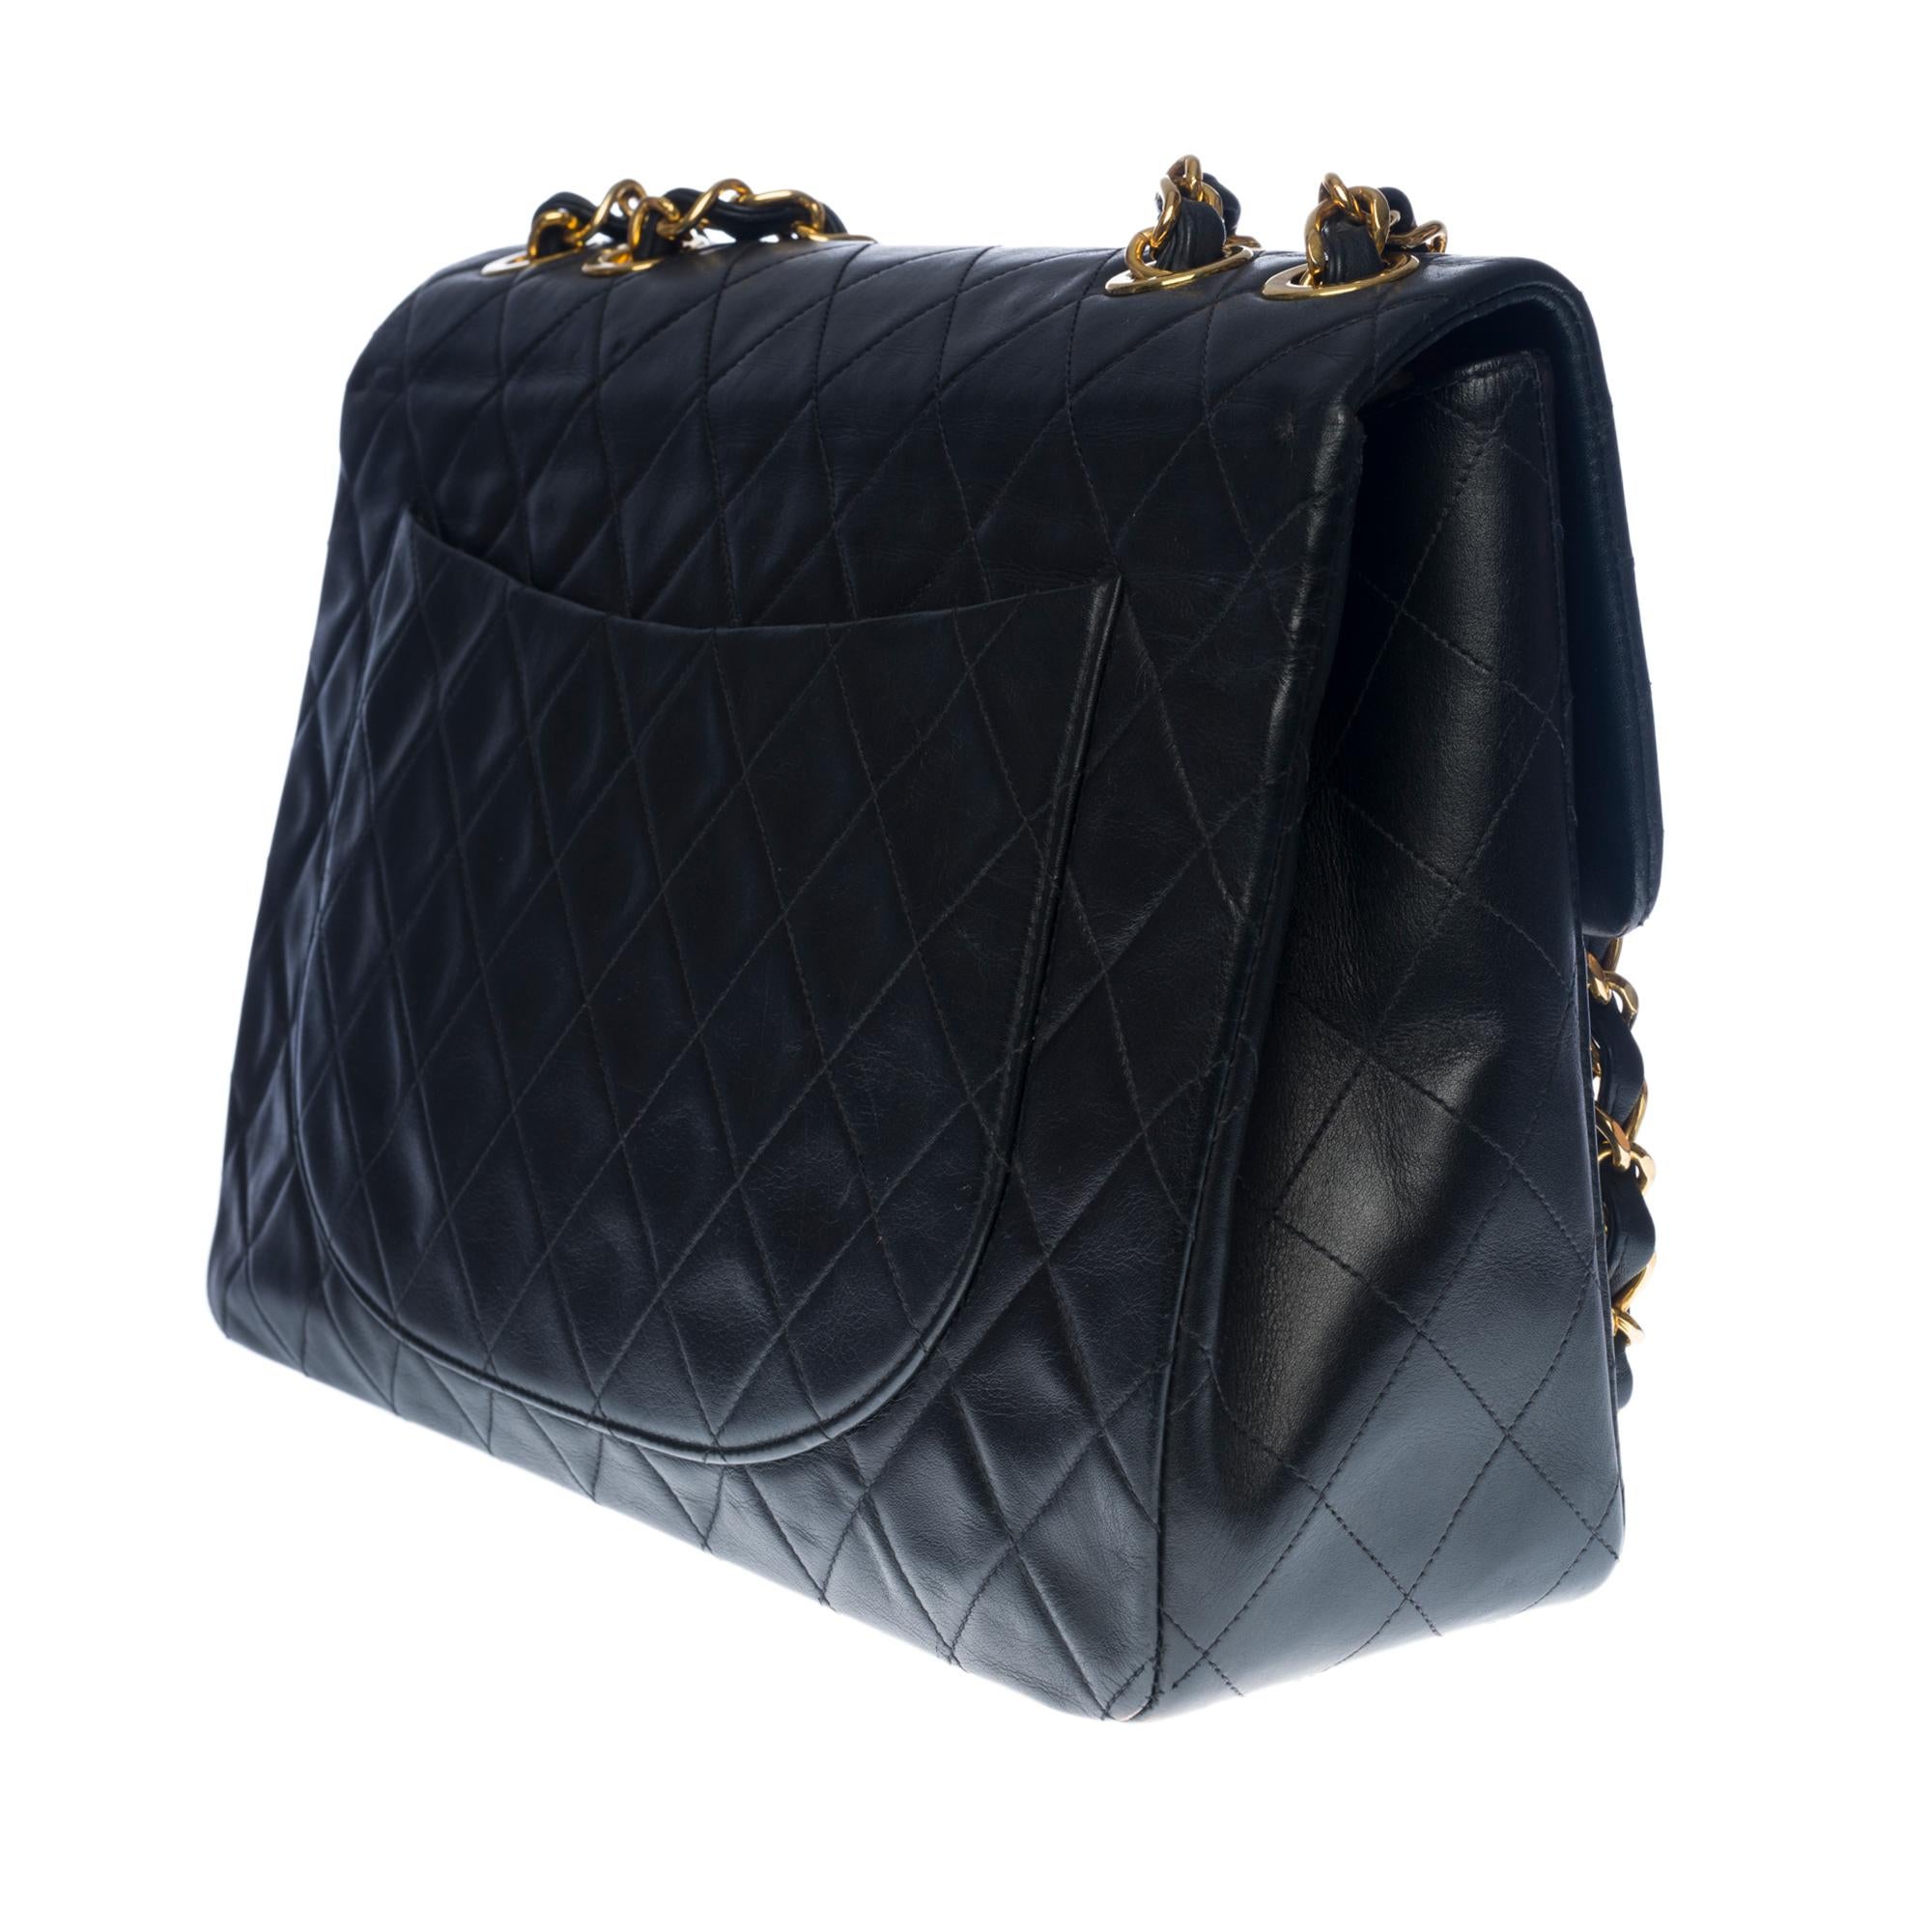 Black Chanel Timeless Maxi Jumbo flap shoulder bag in black quilted lambskin, GHW